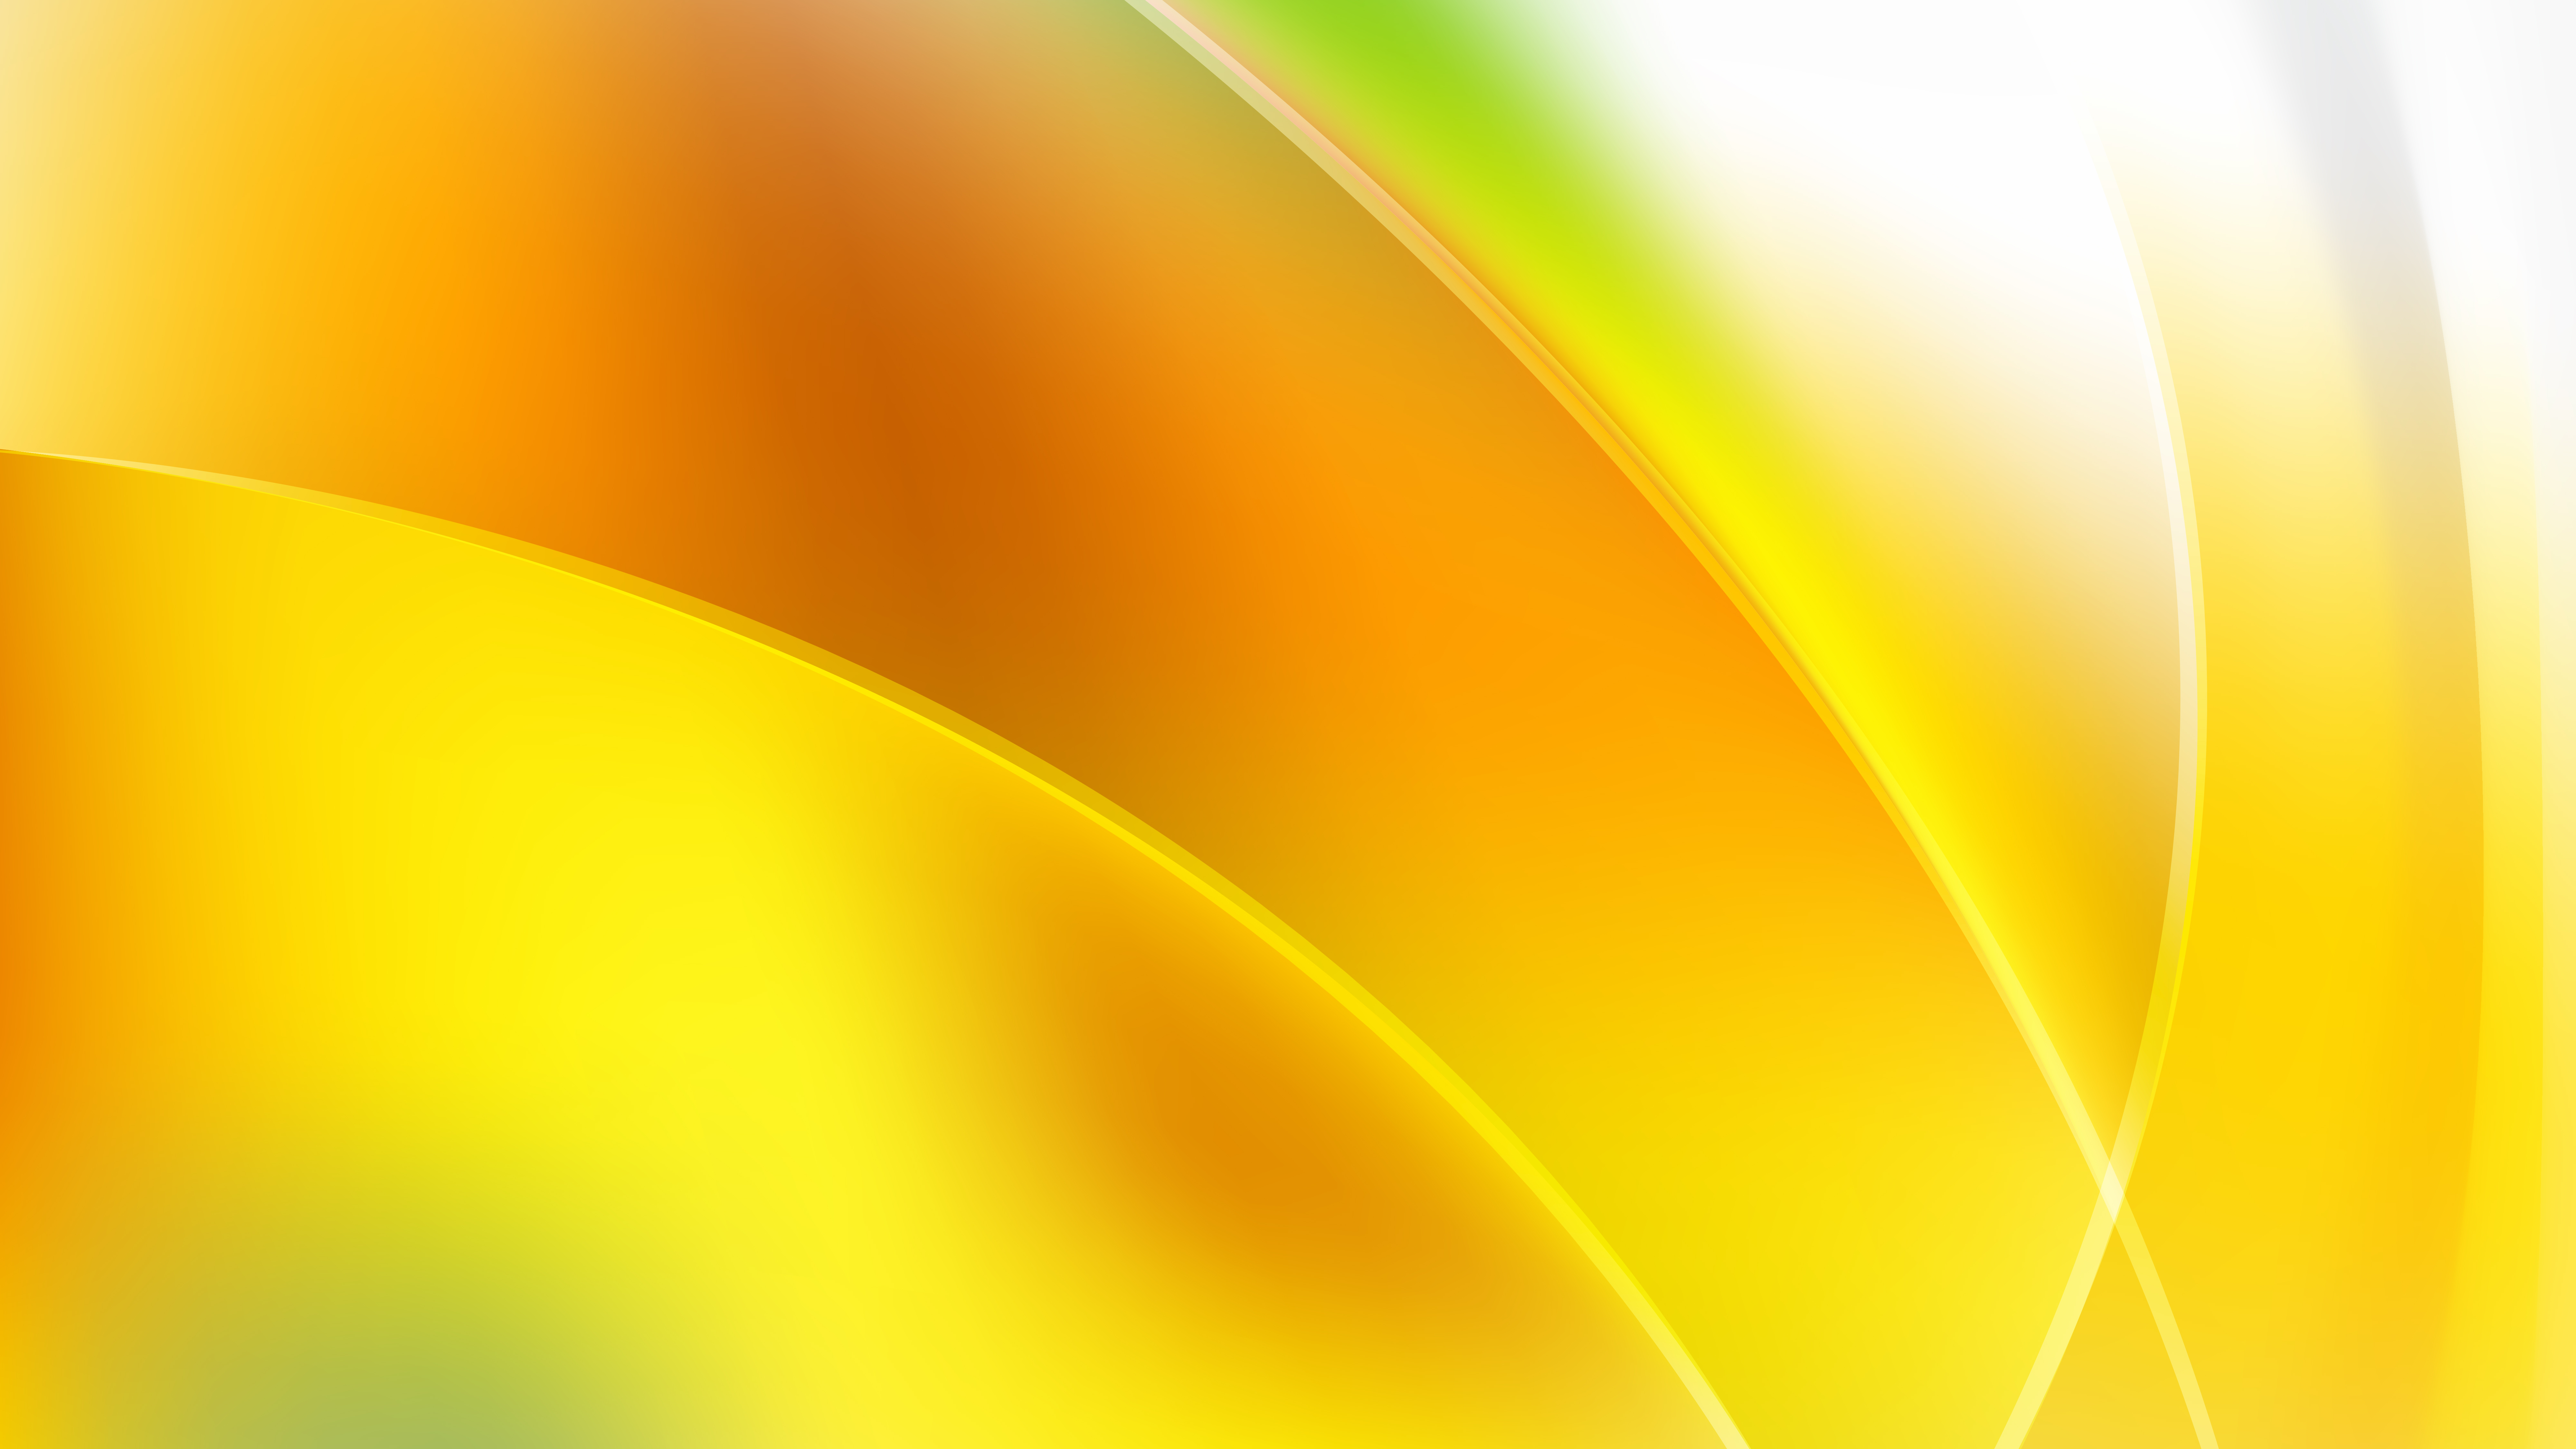 Free Abstract Orange White and Green Graphic Background